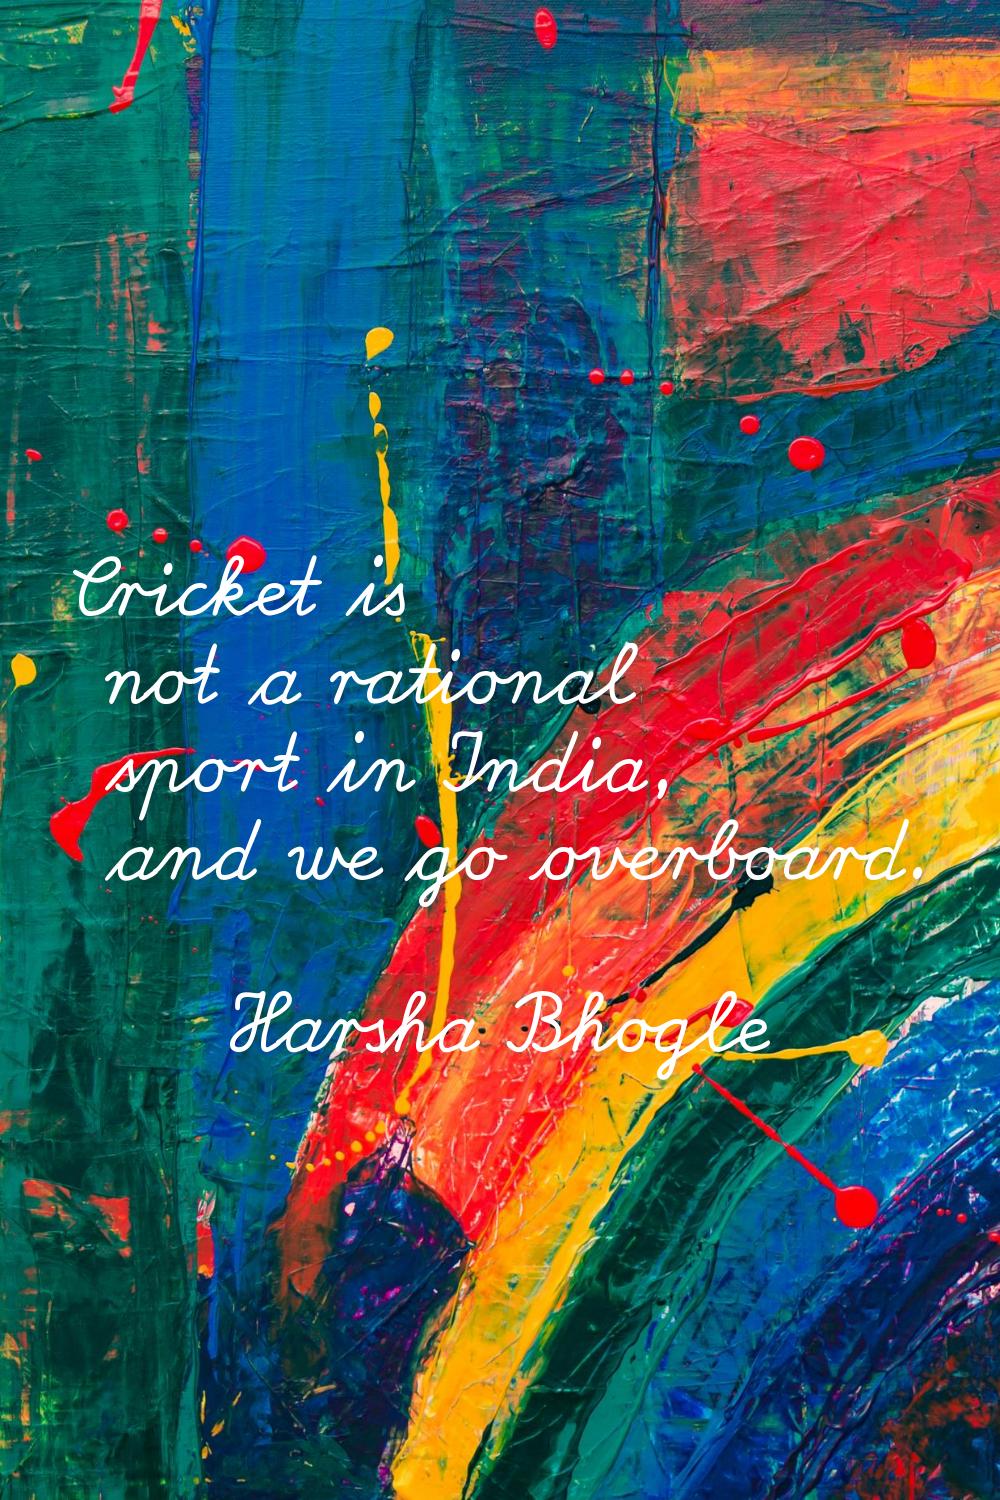 Cricket is not a rational sport in India, and we go overboard.